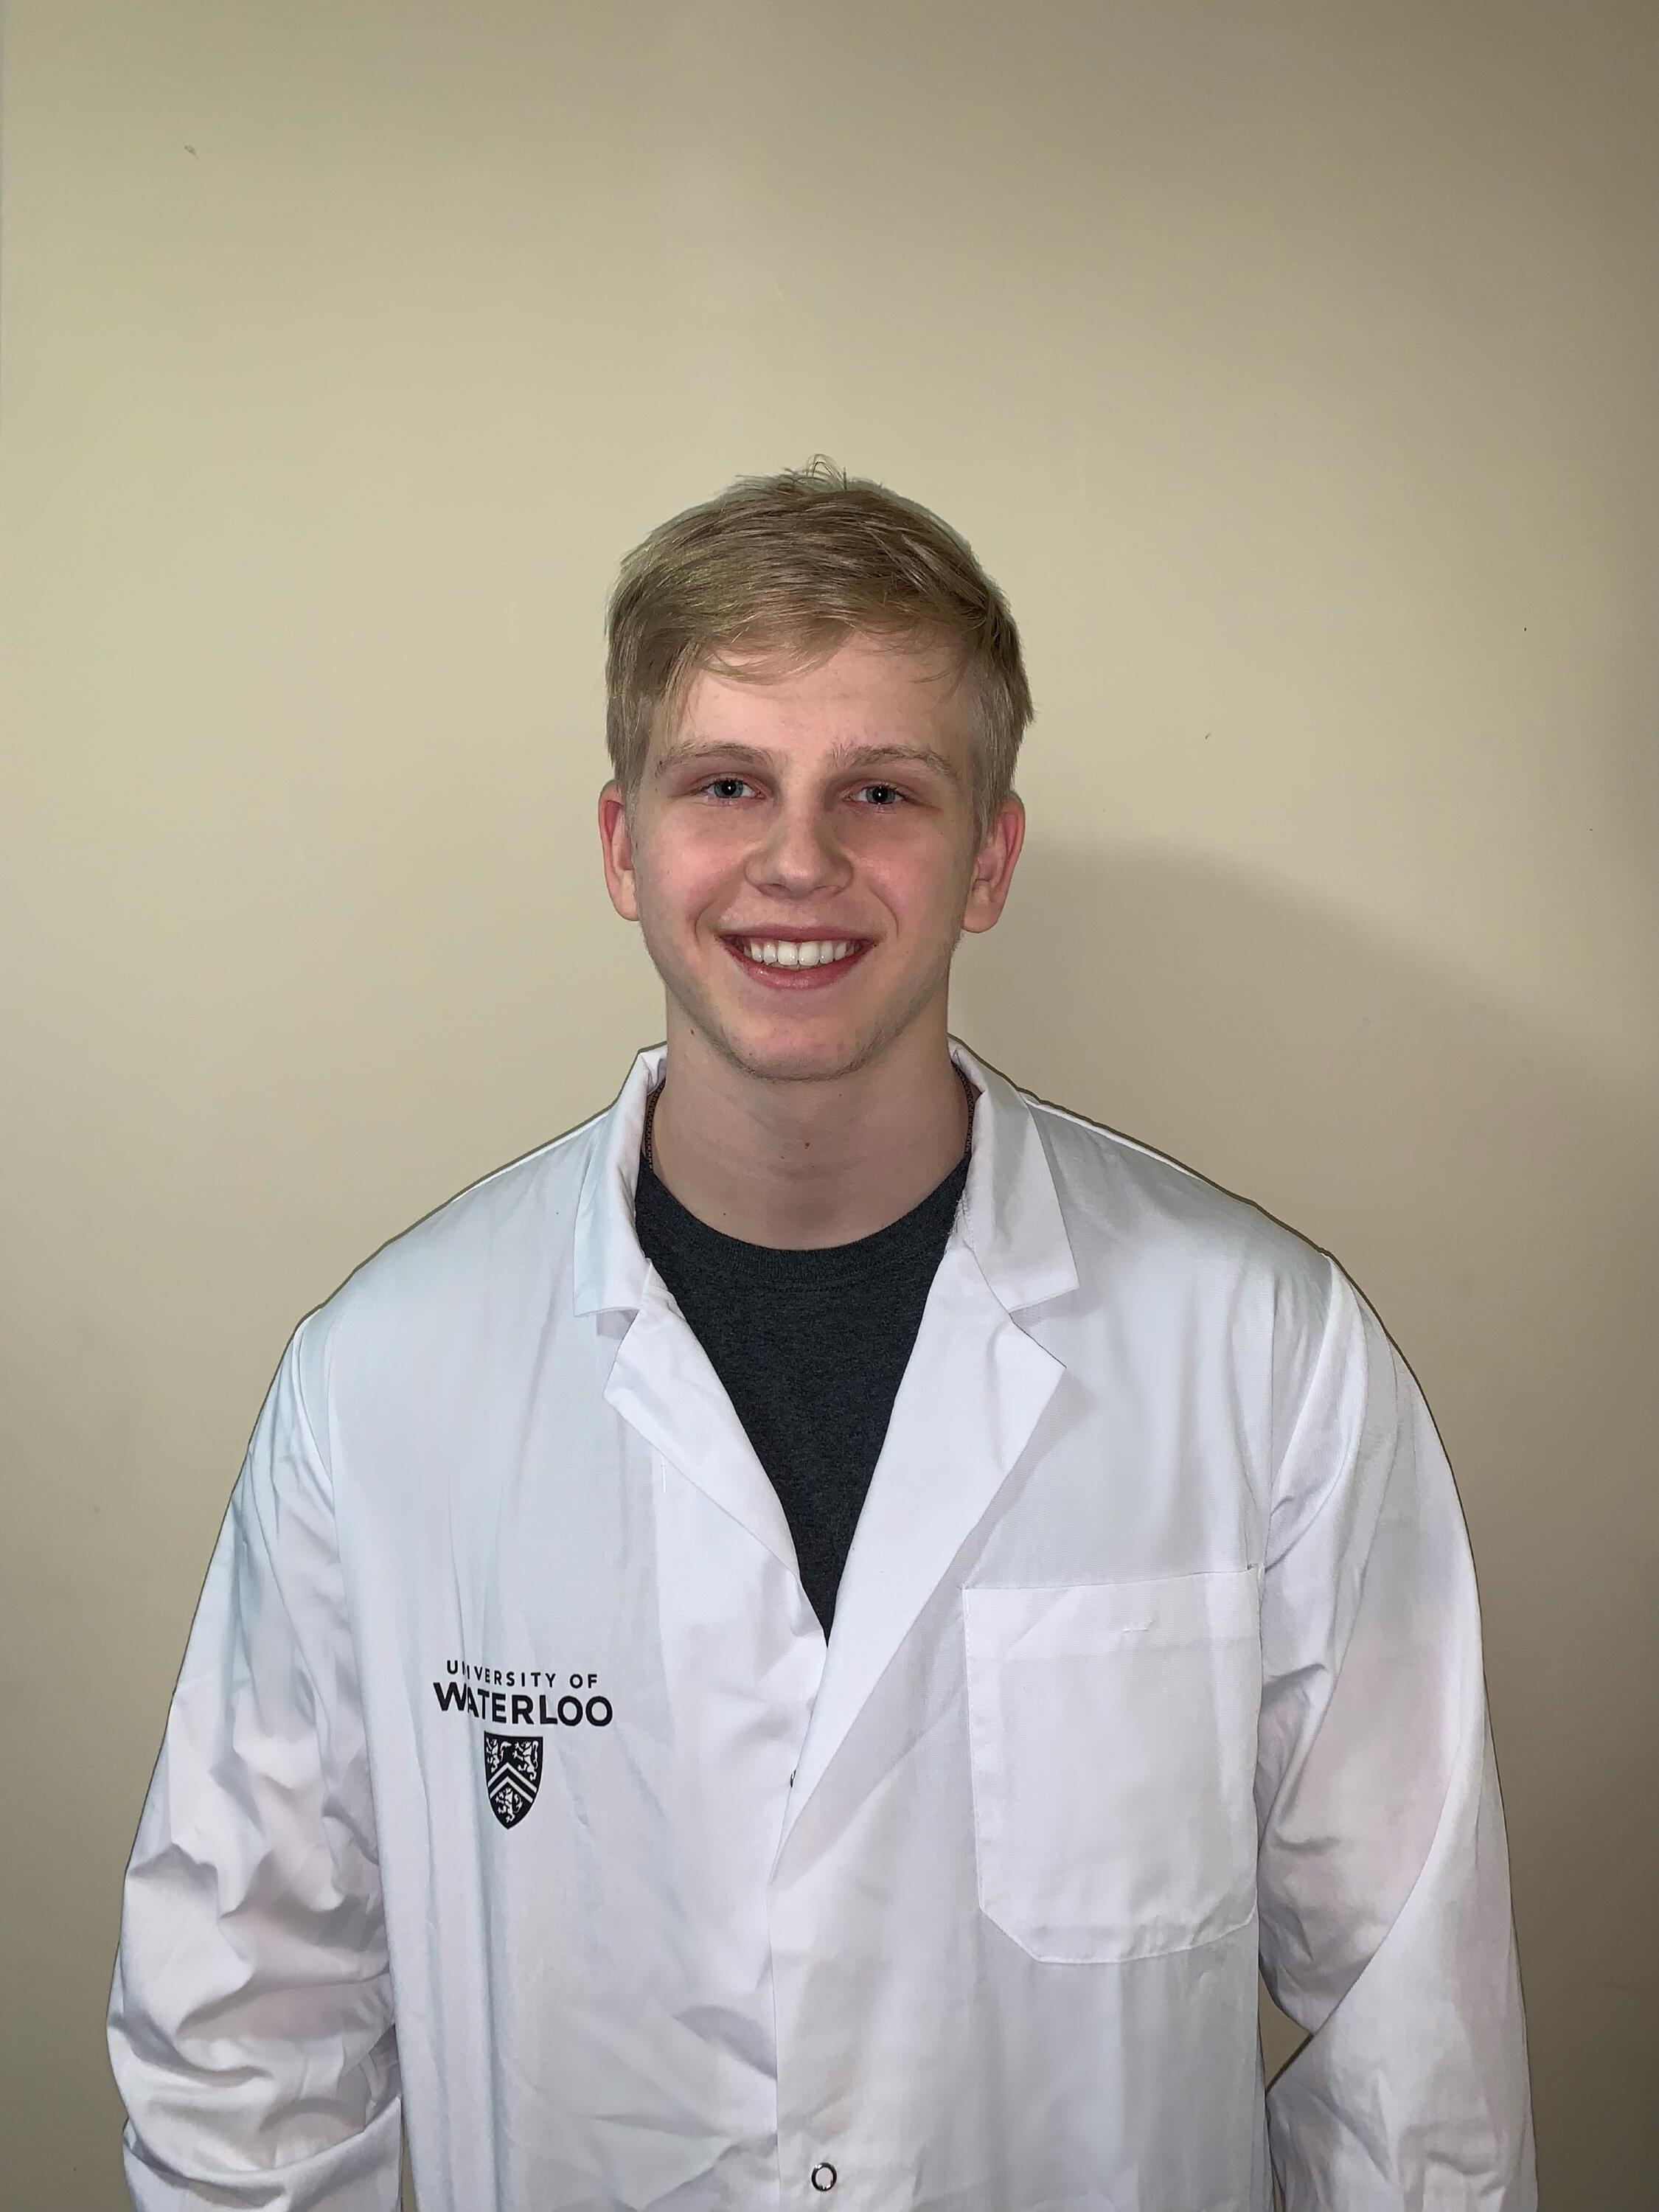 A photo of Max wearing a University of Waterloo lab coat.